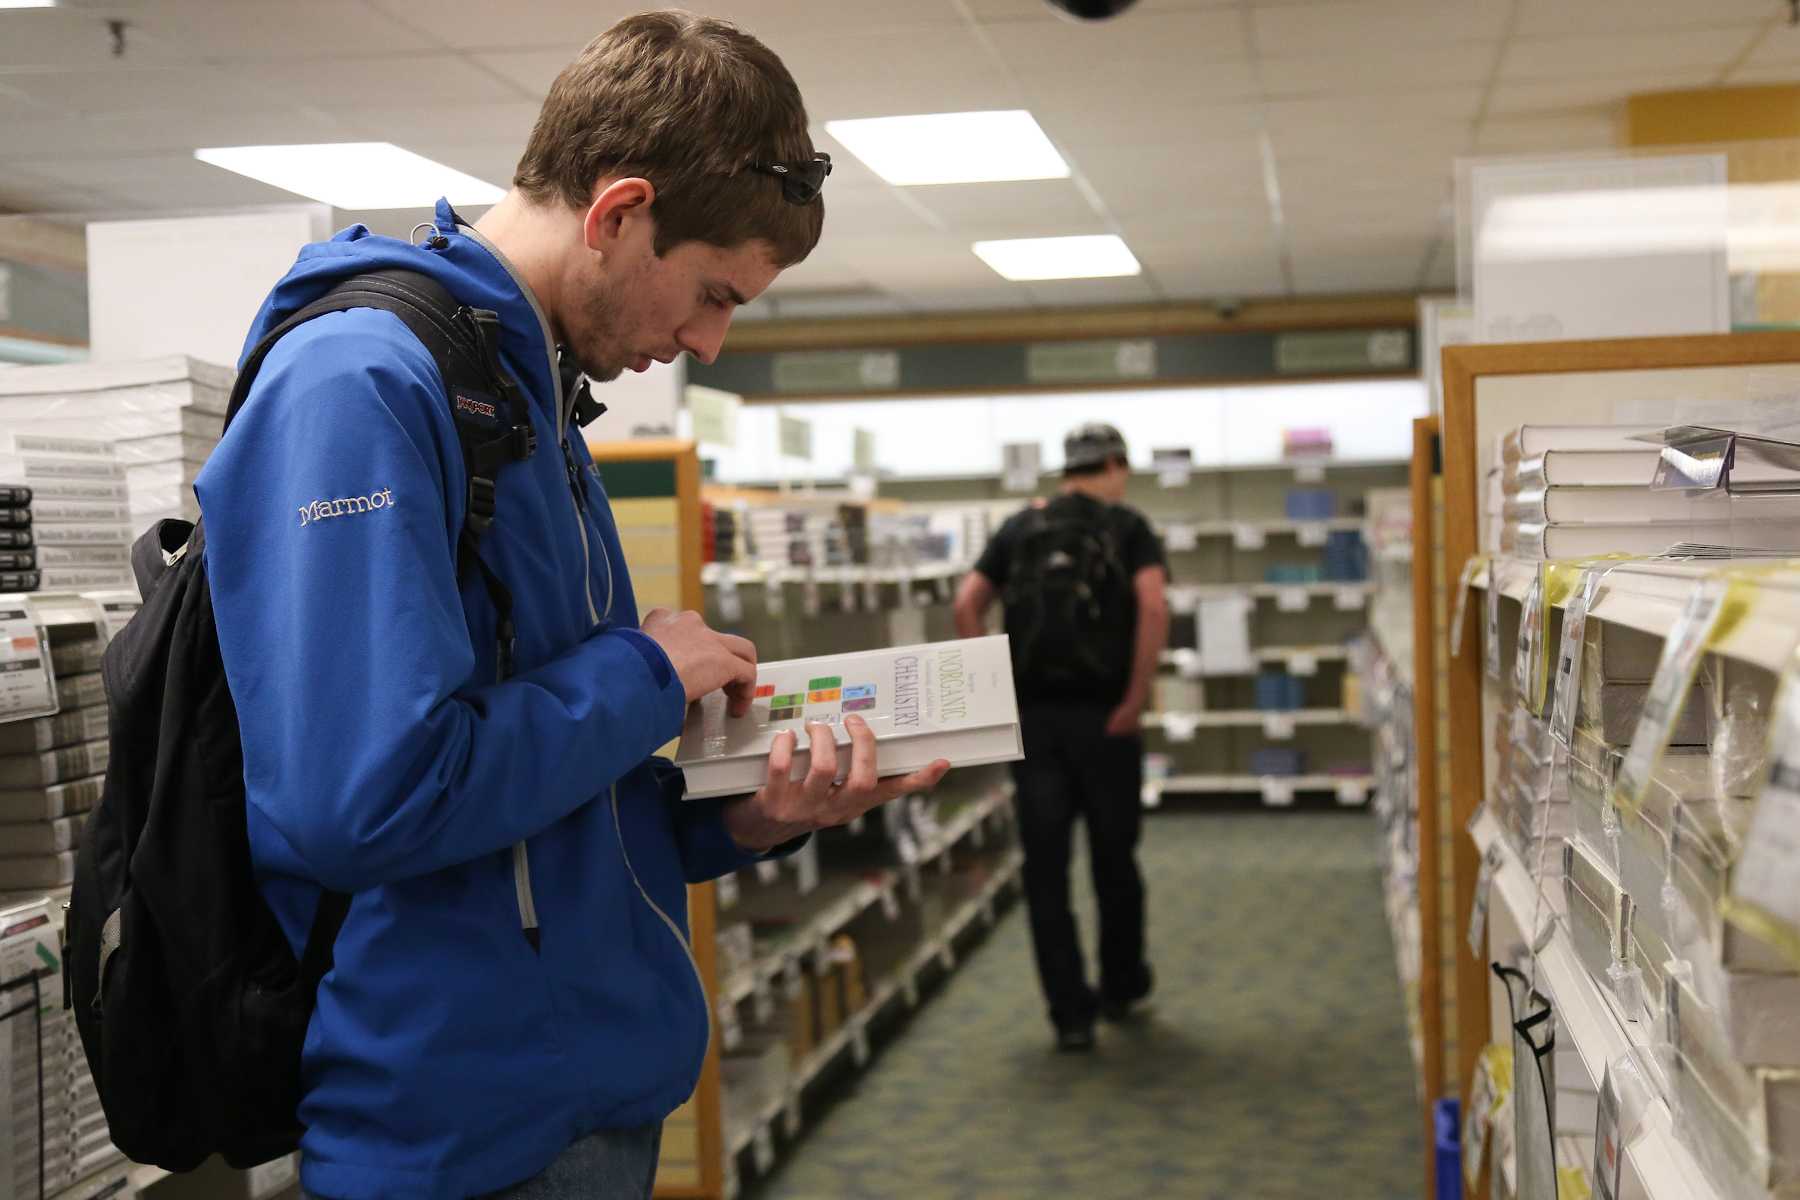 Junior Biology major Miles Eckley shops for books at the Lory Student Center bookstore Monday. With the rising cost of tuition and being a student in general, the university is working on a bill that will establish a tax holiday for all Colorado State university bookstores.